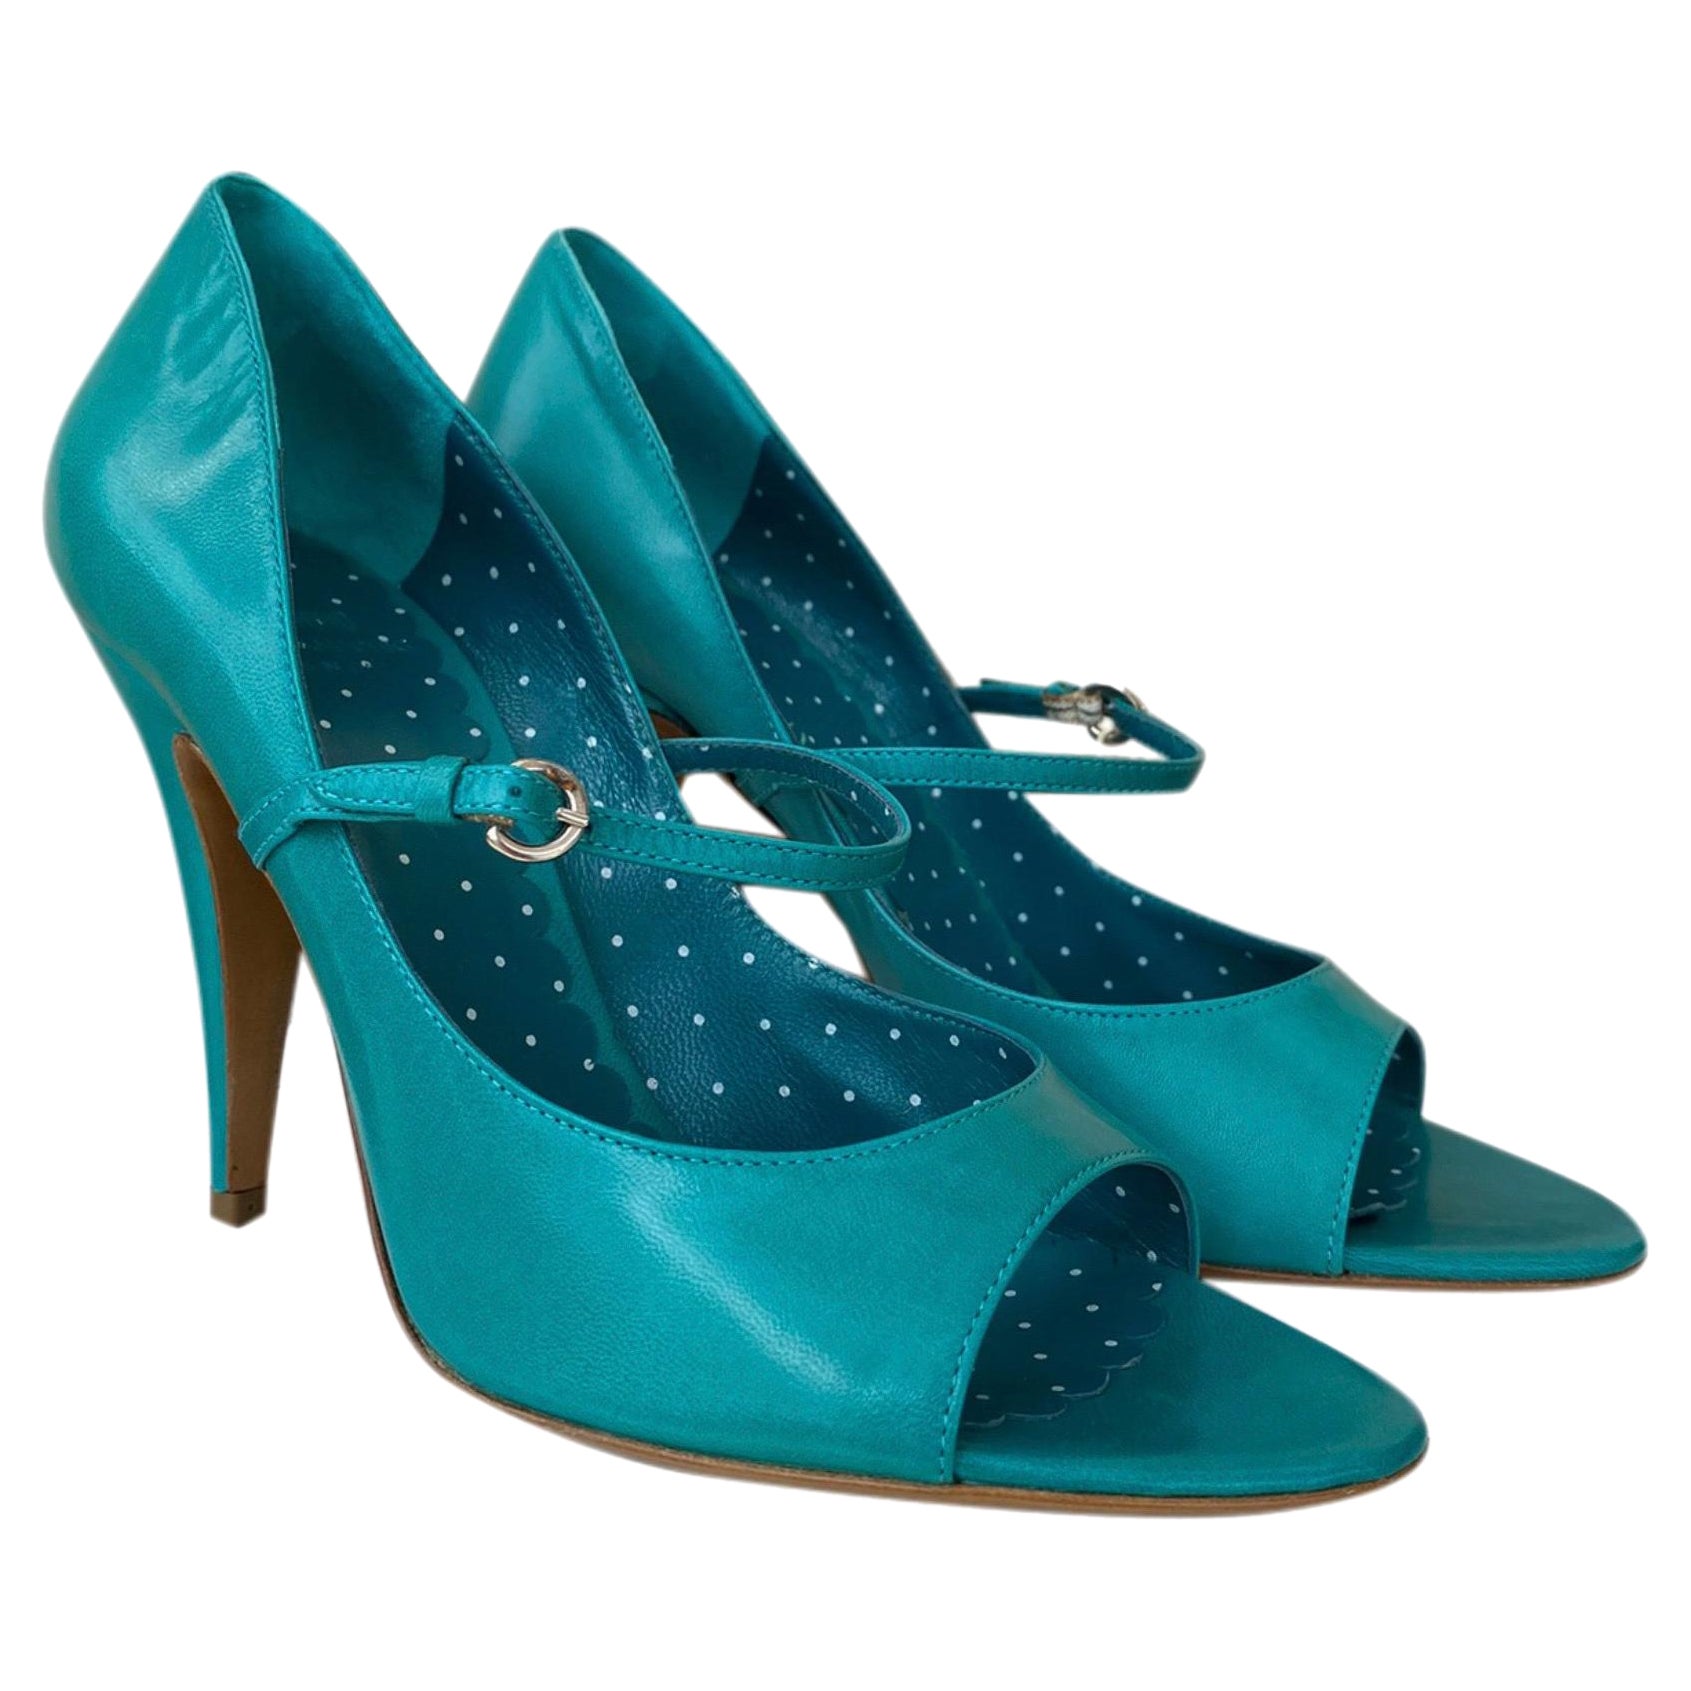 Moschino Cheap & Chic teal Open toe Shoes